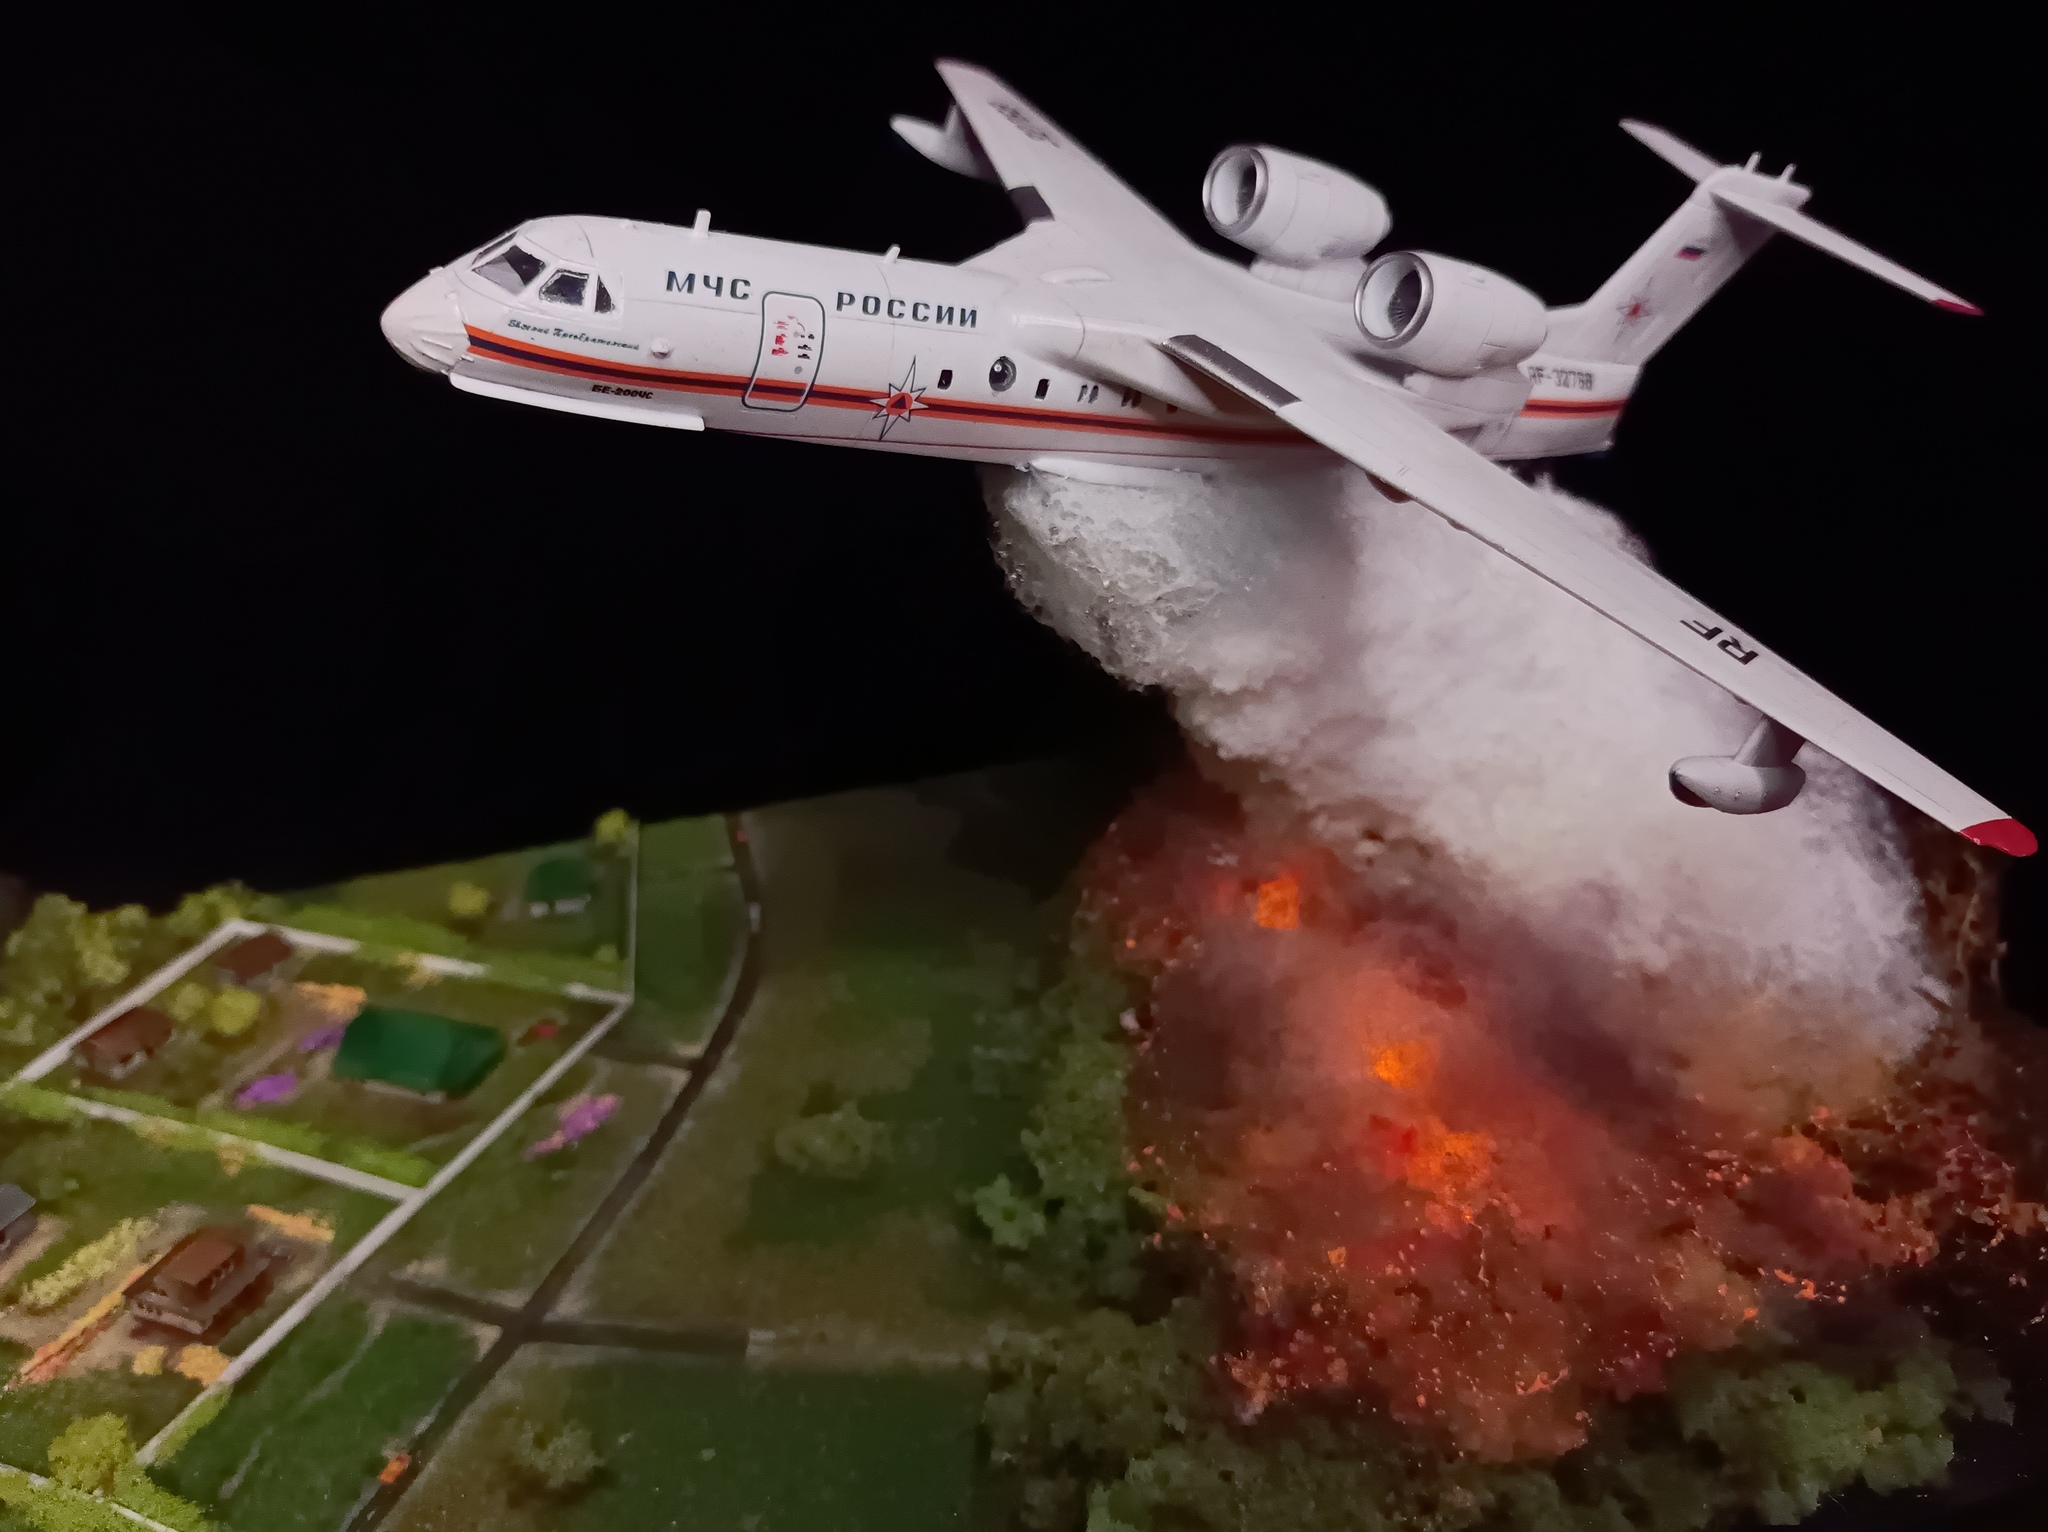 Master of his craft! - My, Diorama, Modeling, Stand modeling, Aviation, , Be-200, Fire, Ministry of Emergency Situations, , Presents, Interior, Games, Navy, Epoxy resin, Longpost